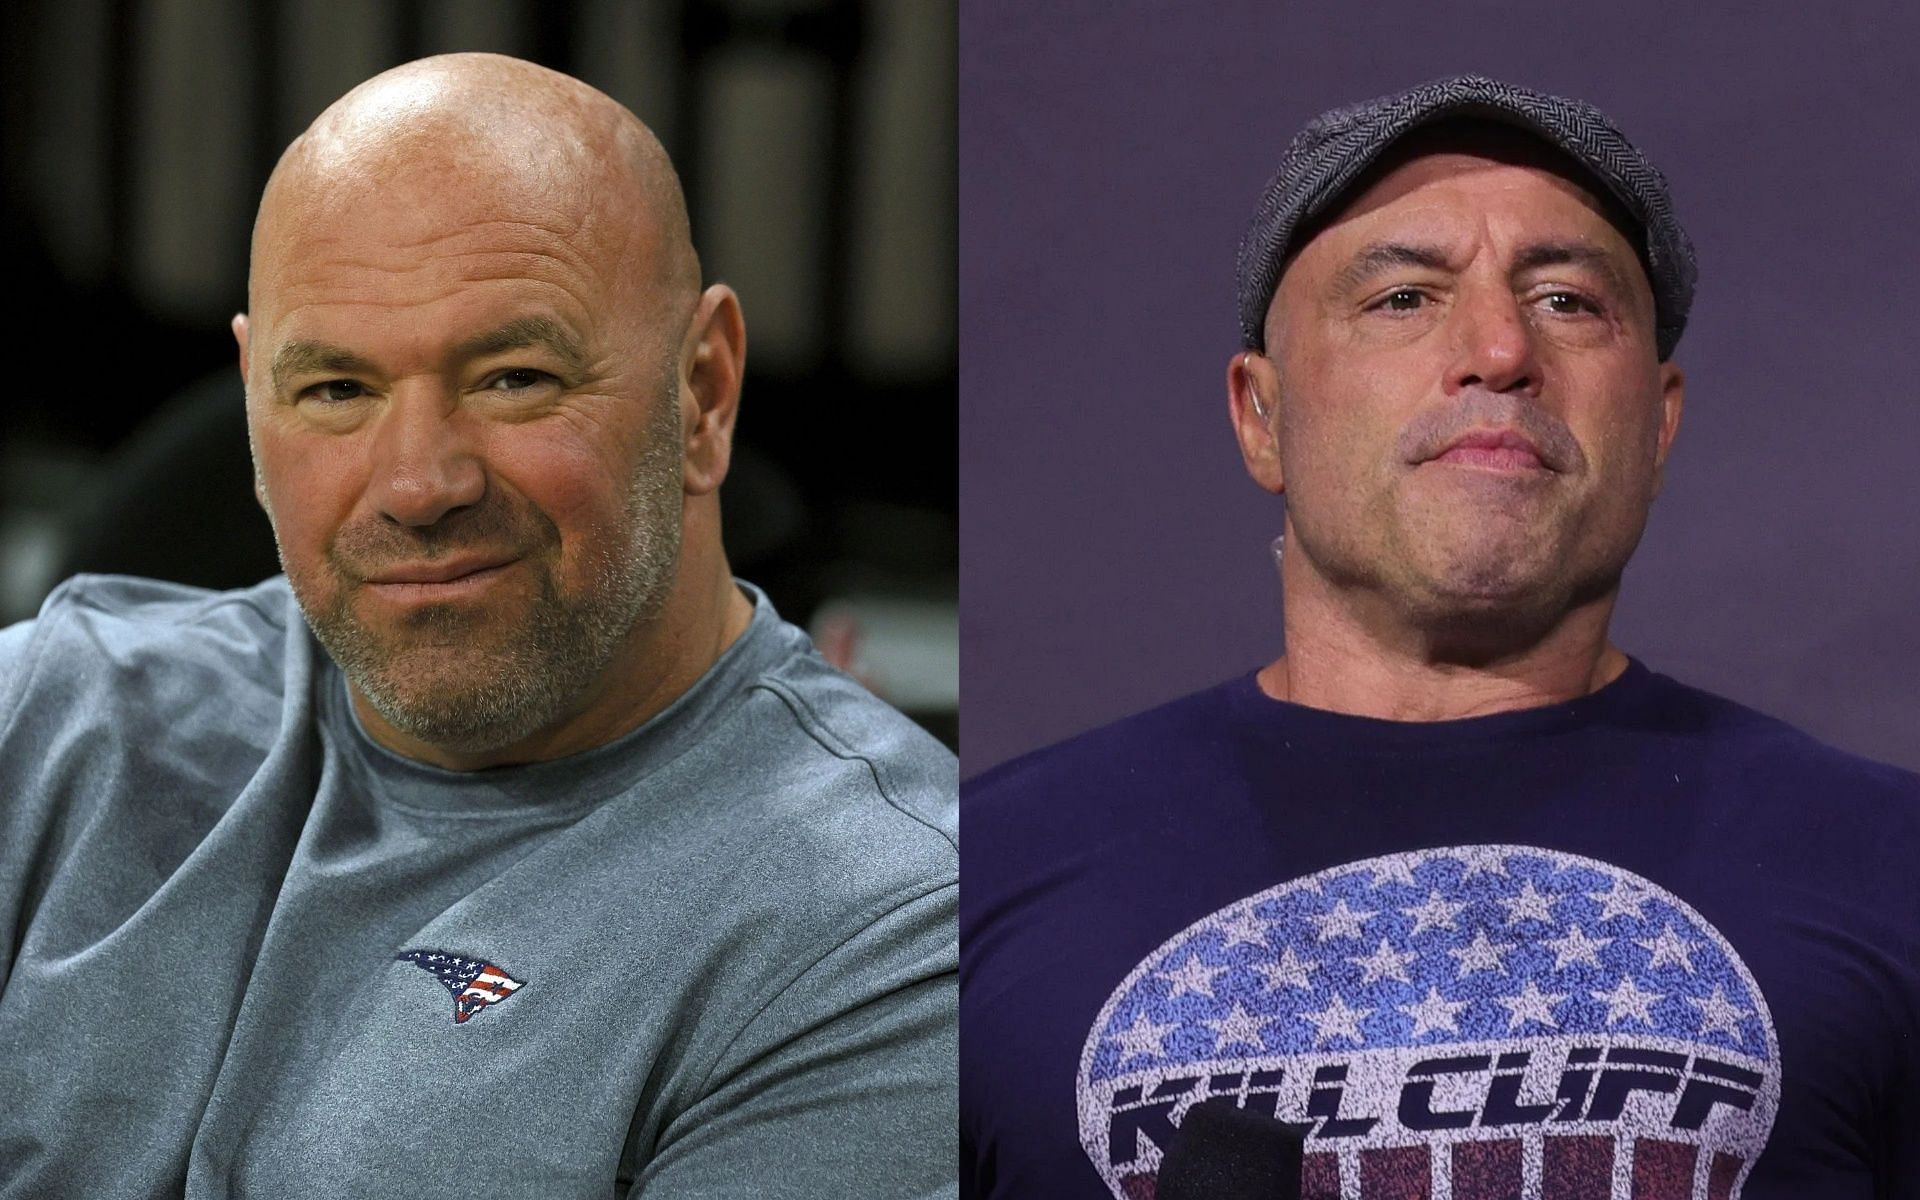 Dana White (L) and Joe Rogan (R) have been close for years. [Getty Images]